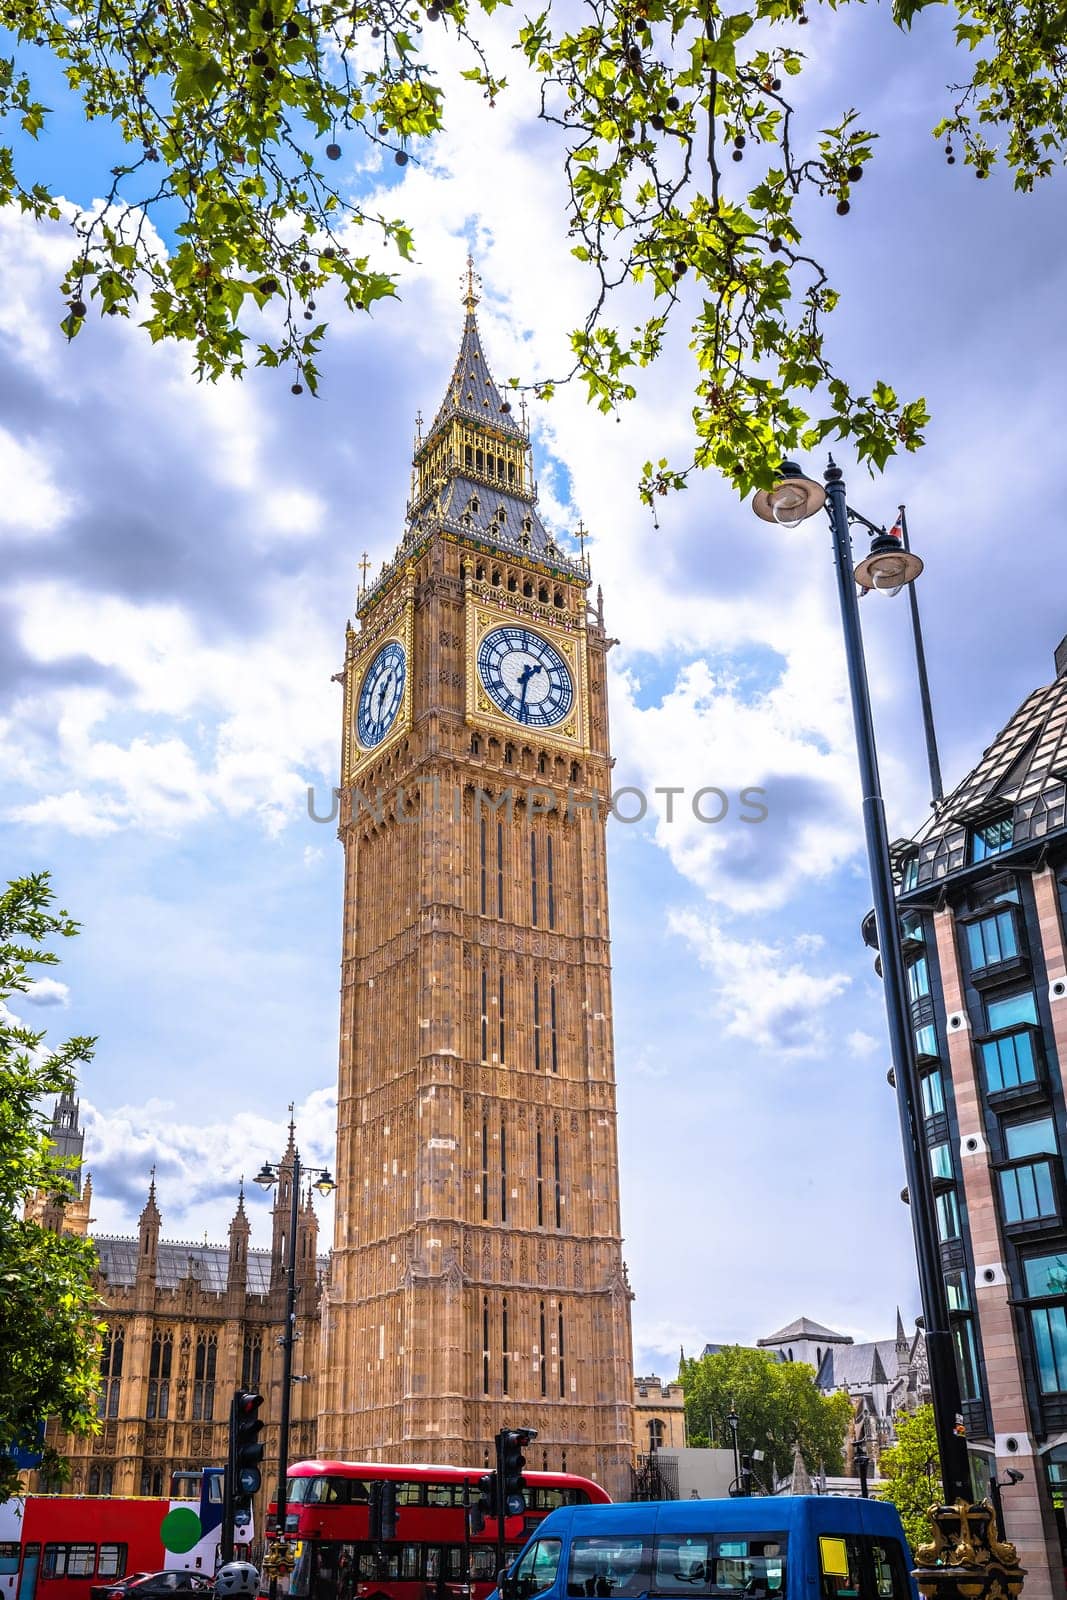 Palace of Westminster and Big Ben view by xbrchx